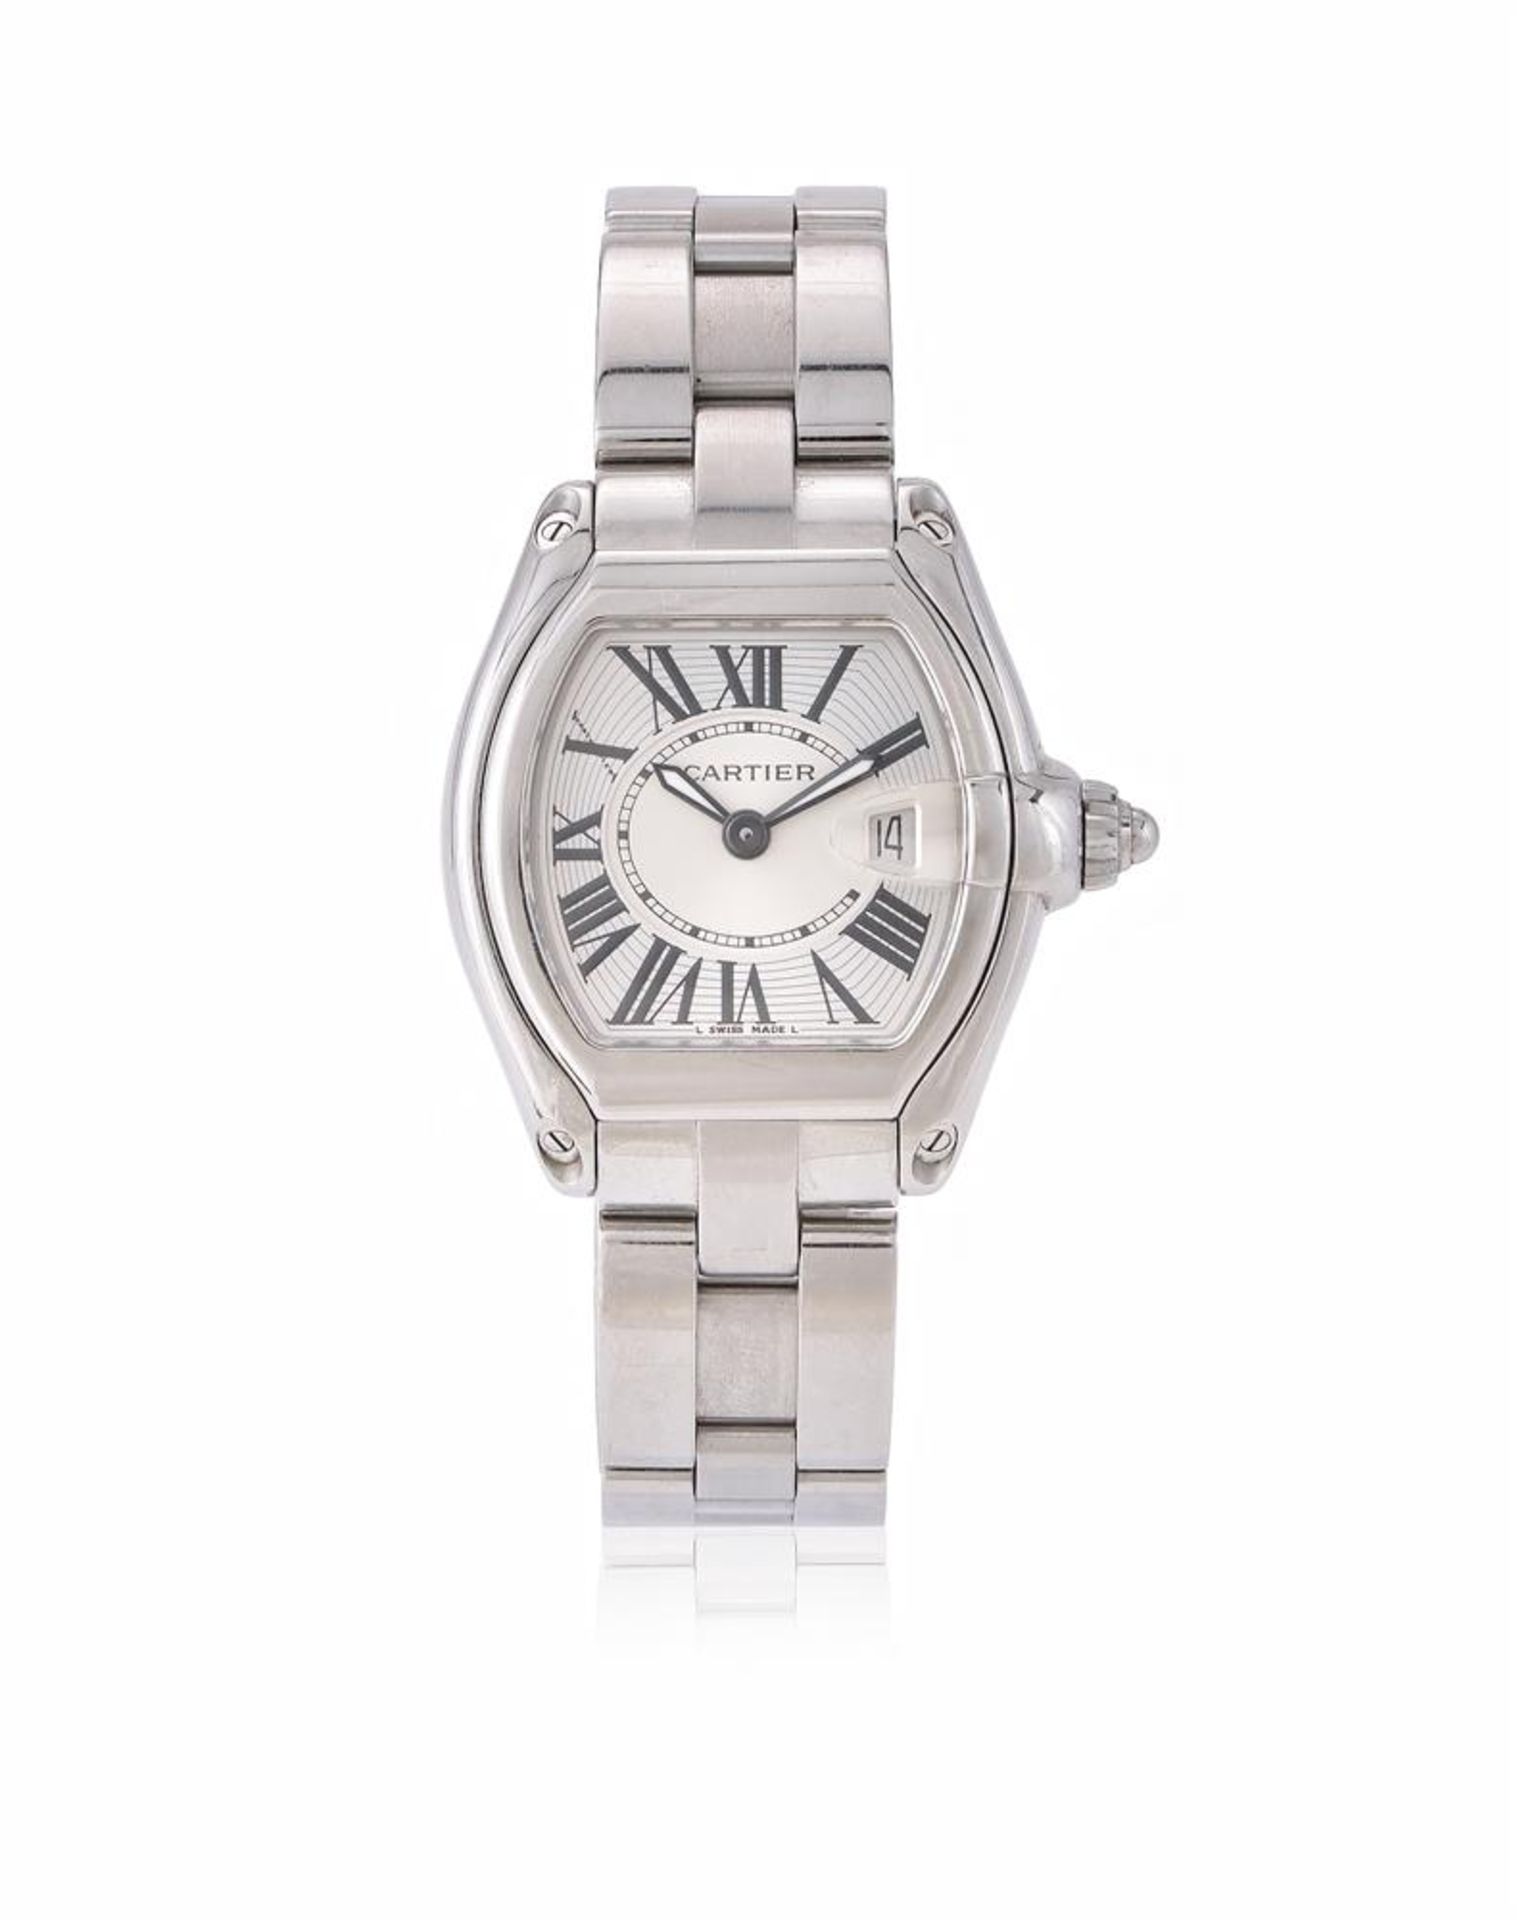 CARTIER, ROADSTER, REF. 2675, A LADY'S STAINLESS STEEL BRACELET WATCH WITH DATE